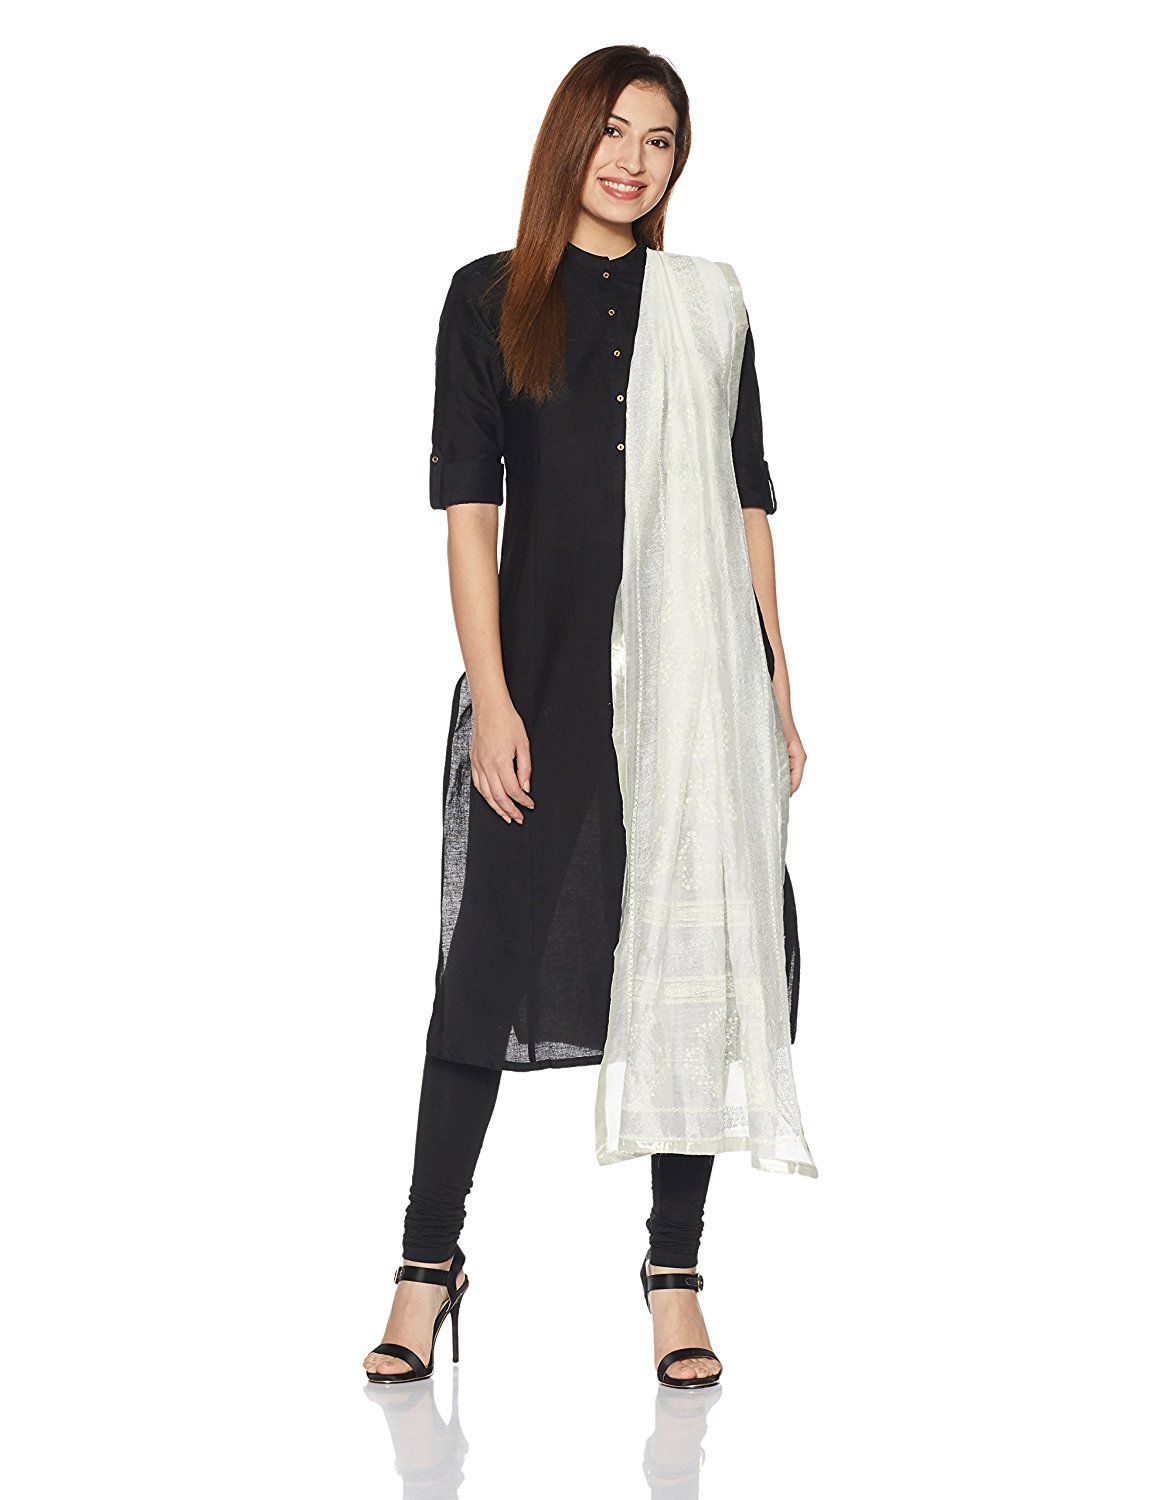 W Off White Viscose Aari Embroidered Dupatta Price in India - Buy W Off ...